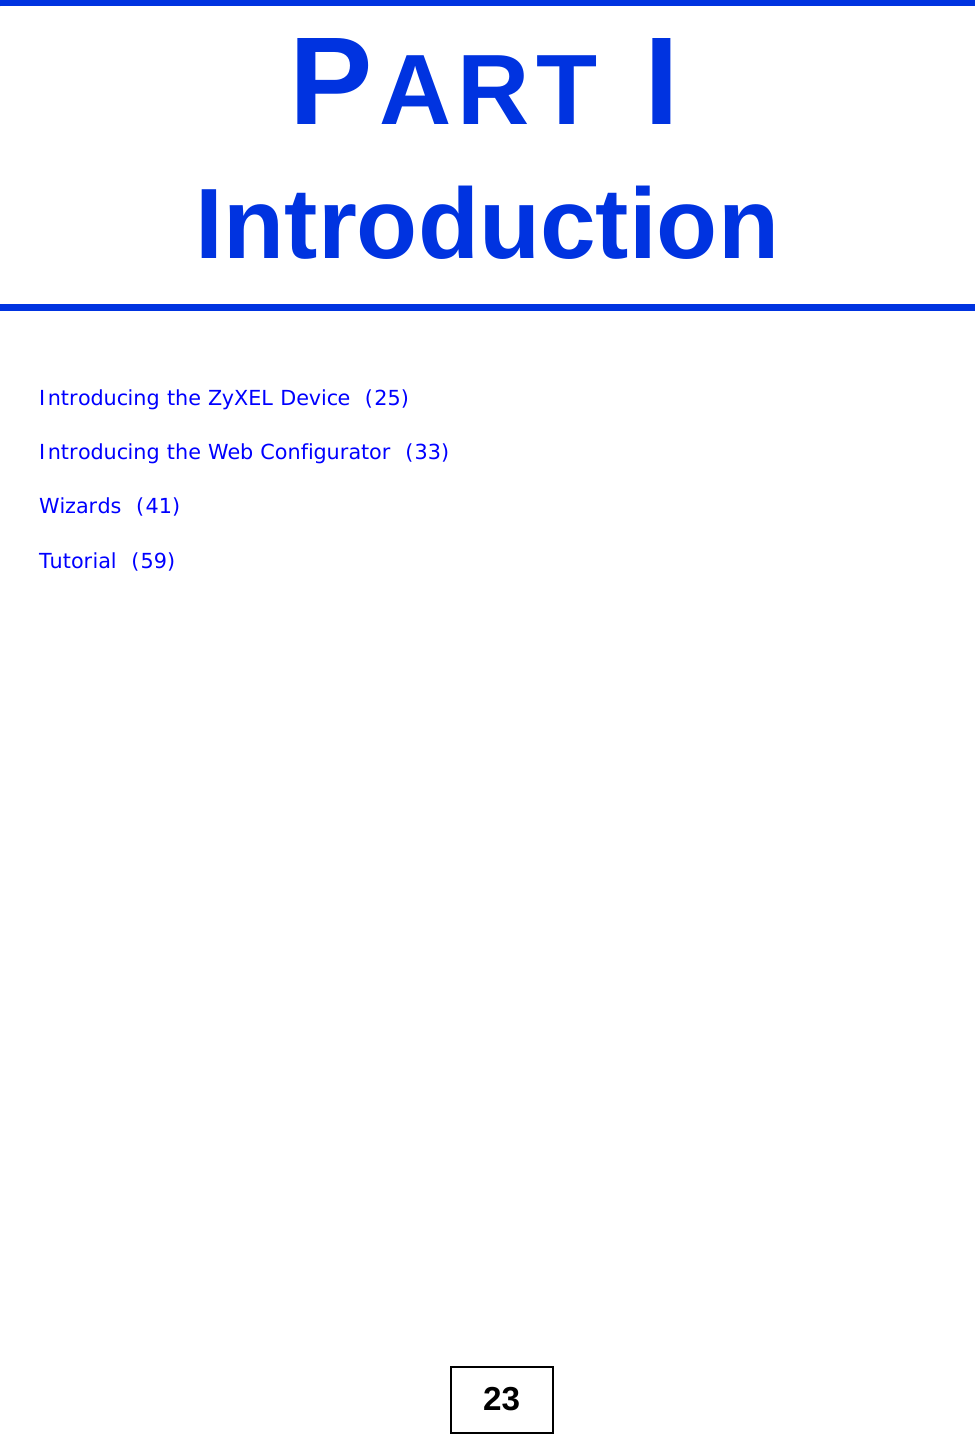 23PART IIntroductionIntroducing the ZyXEL Device  (25)Introducing the Web Configurator  (33)Wizards  (41)Tutorial  (59)